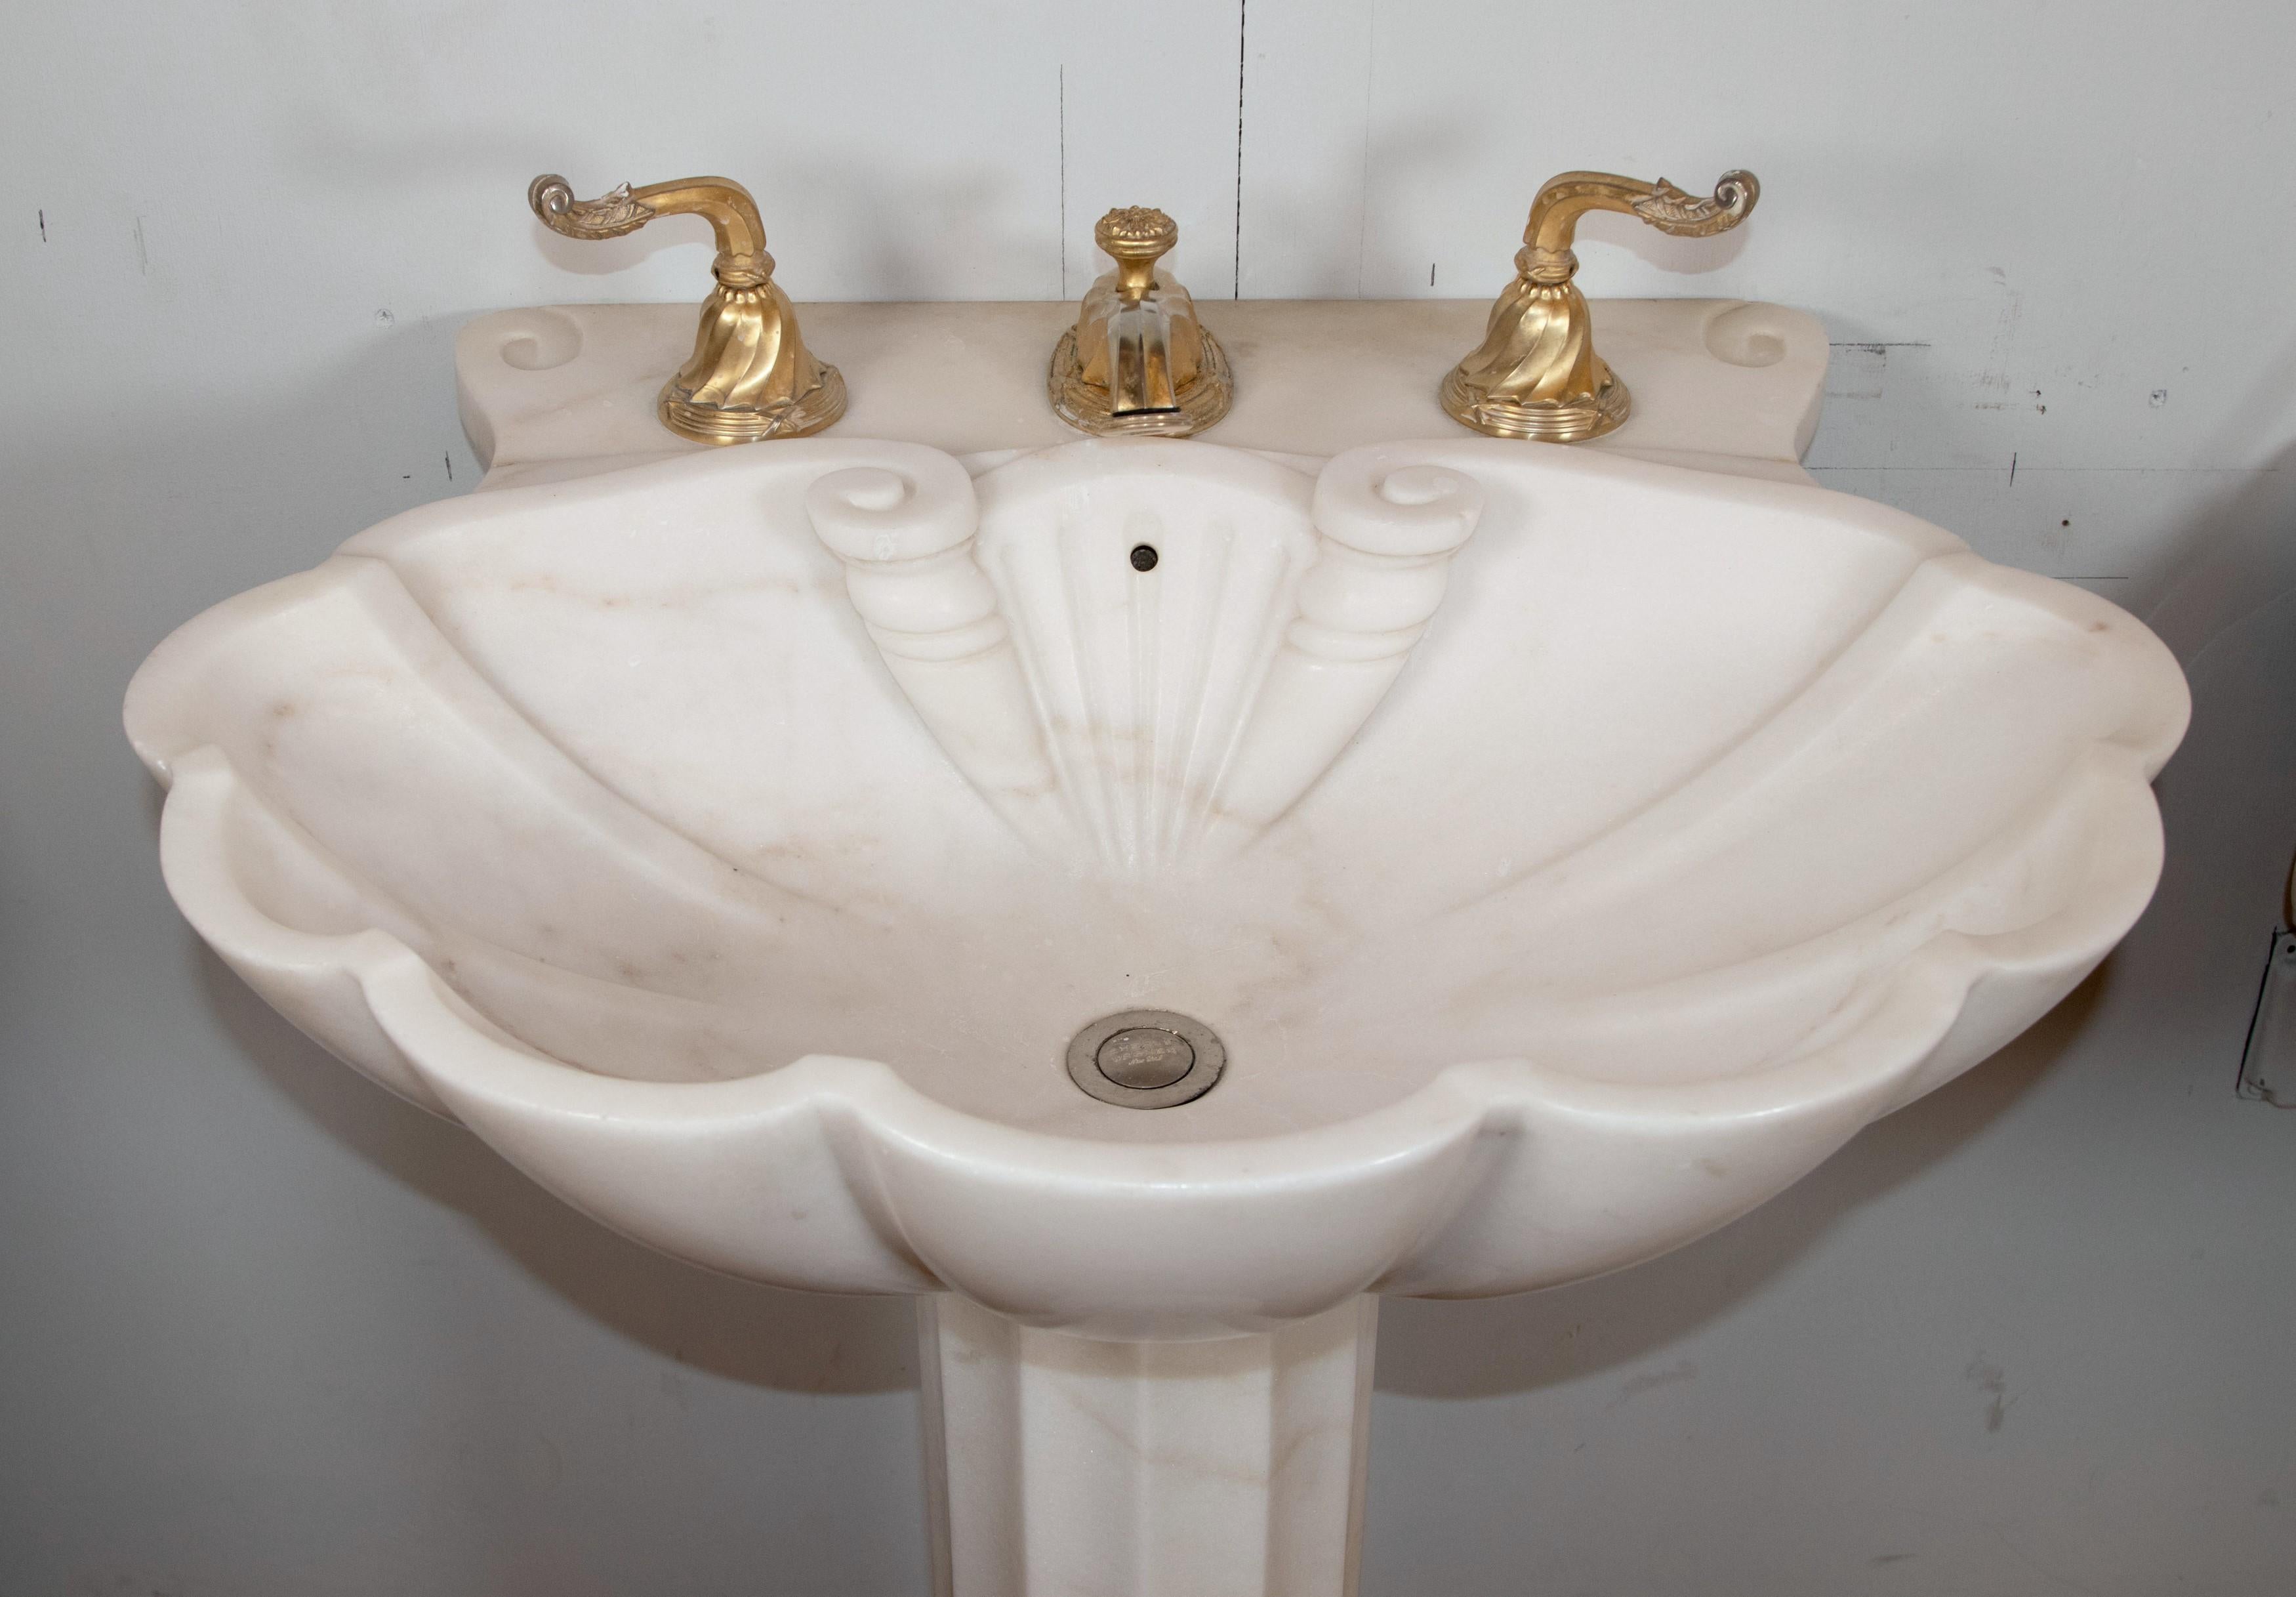 Sheryl Wagner pedestal sink with gilt hardware in a white and gray veined marble construction. Good condition with appropriate wear from age. One available. Please note, this item is located in one of our NYC locations.